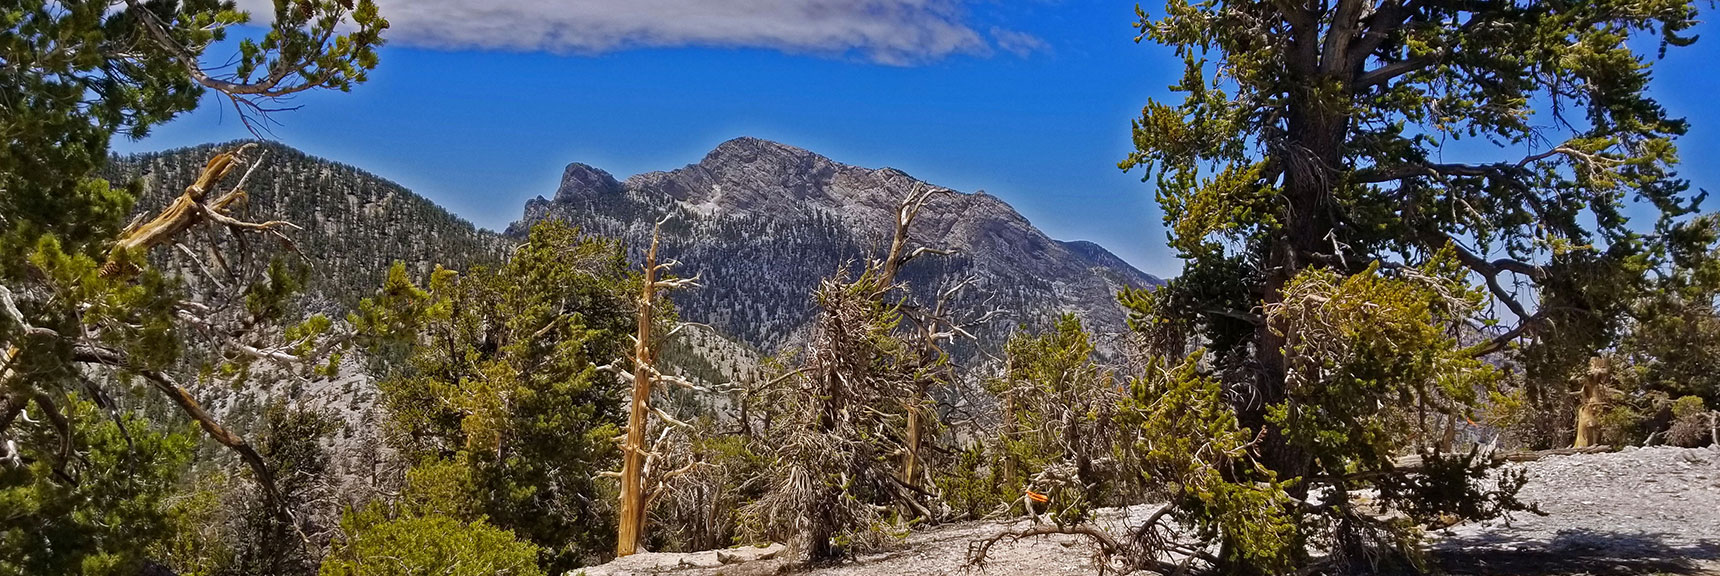 Continuing Down the Western Approach Ridge, Pointed at First Toward McFarland Peak. | The Sisters South | Lee Canyon | Mt Charleston Wilderness | Spring Mountains, Nevada